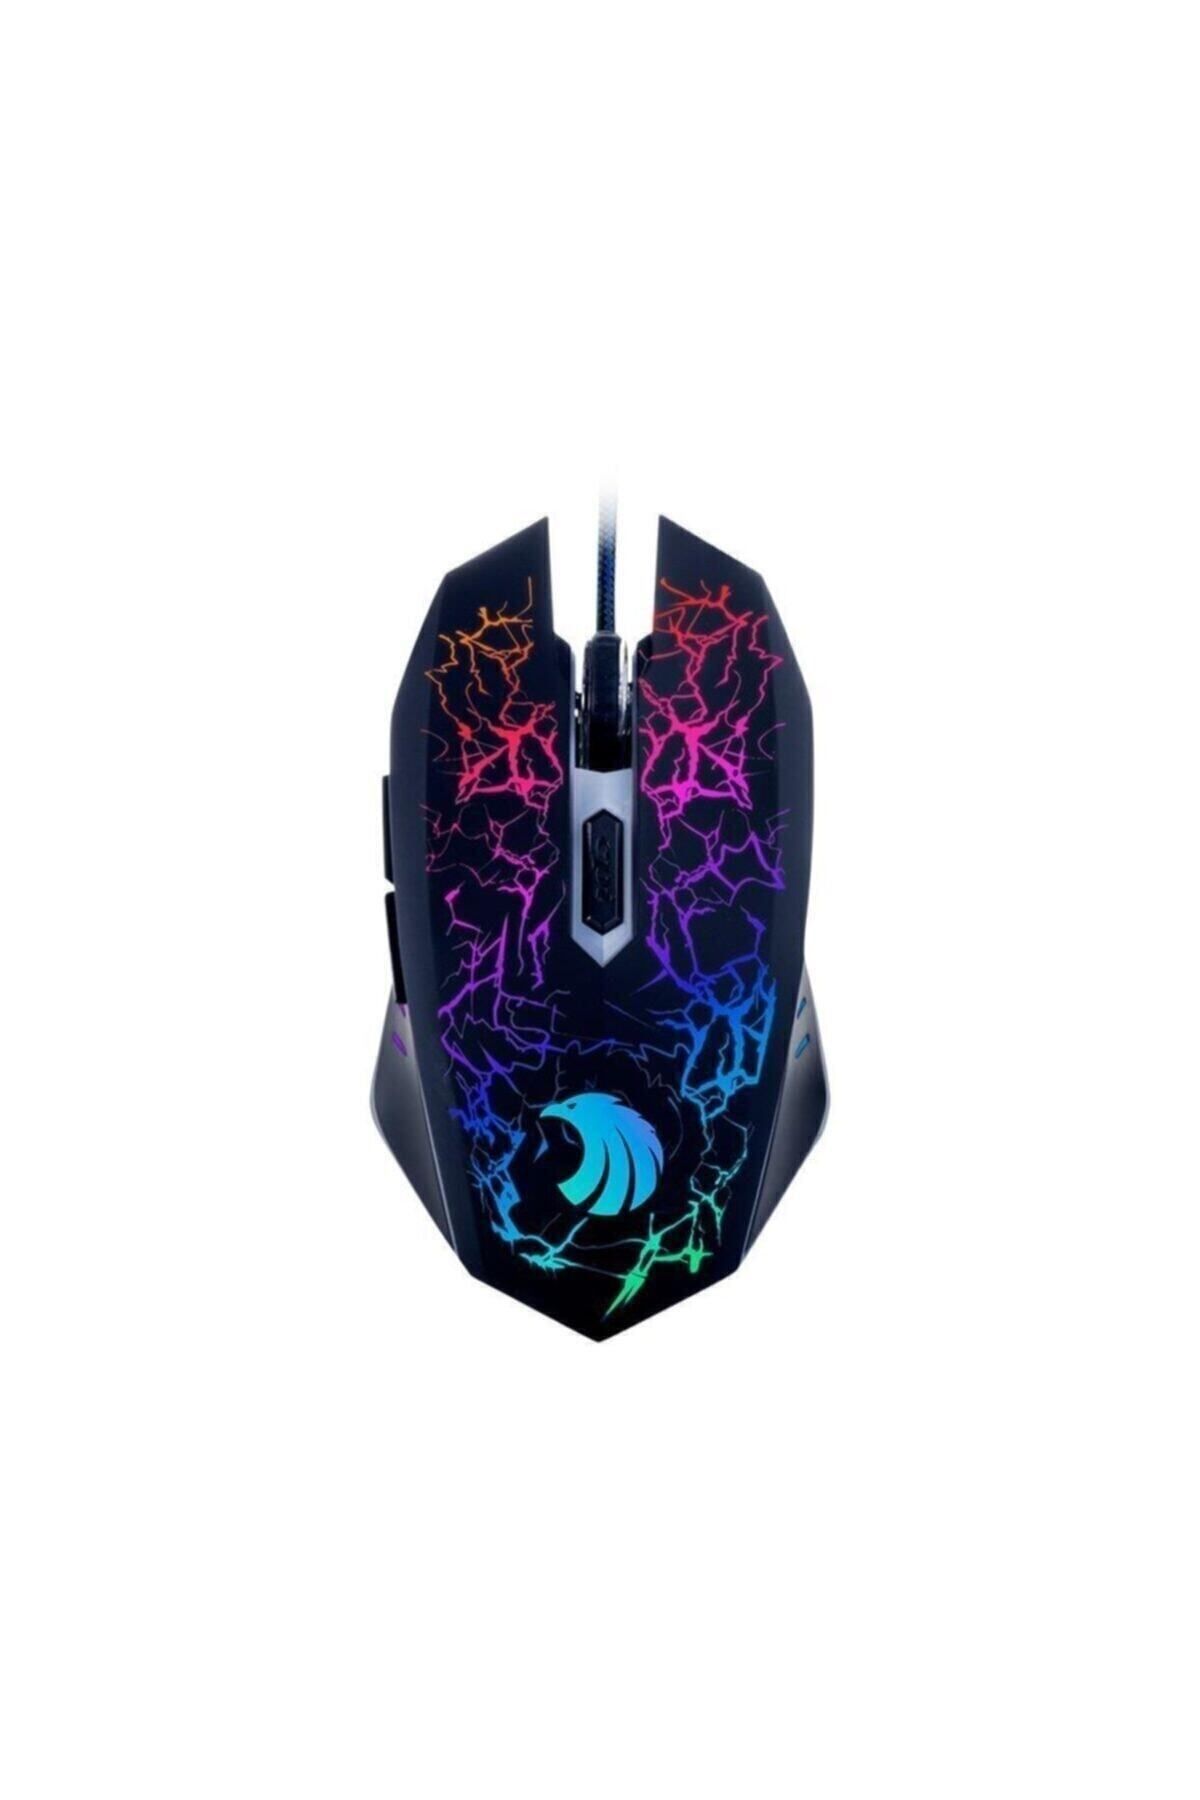 Polosmart Pgm02 Gaming Mouse